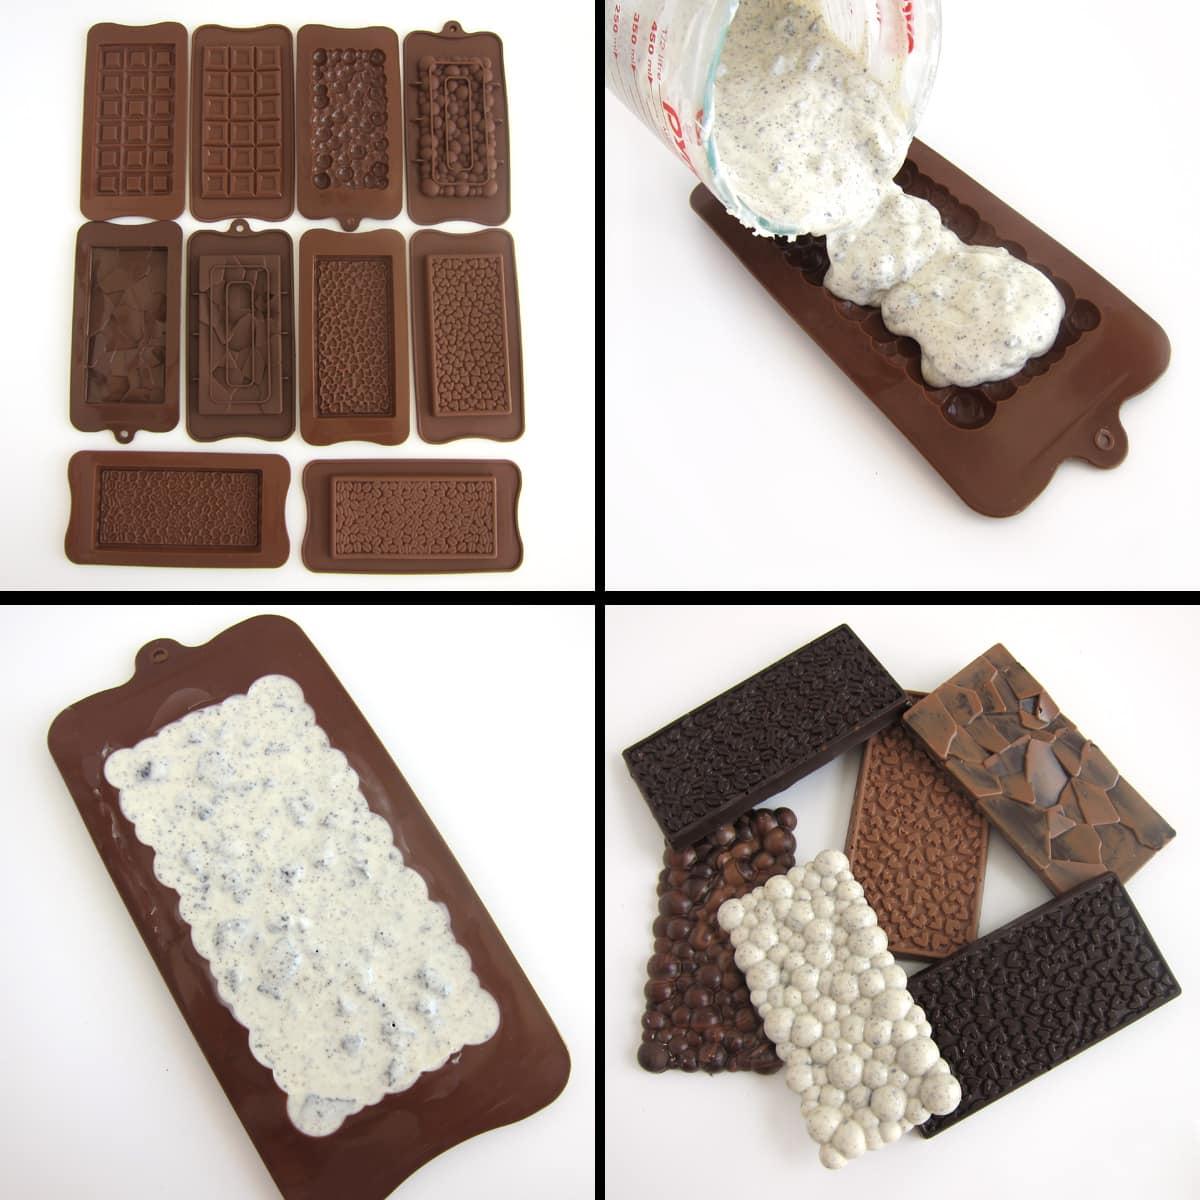 making homemade candy bars using silicone molds